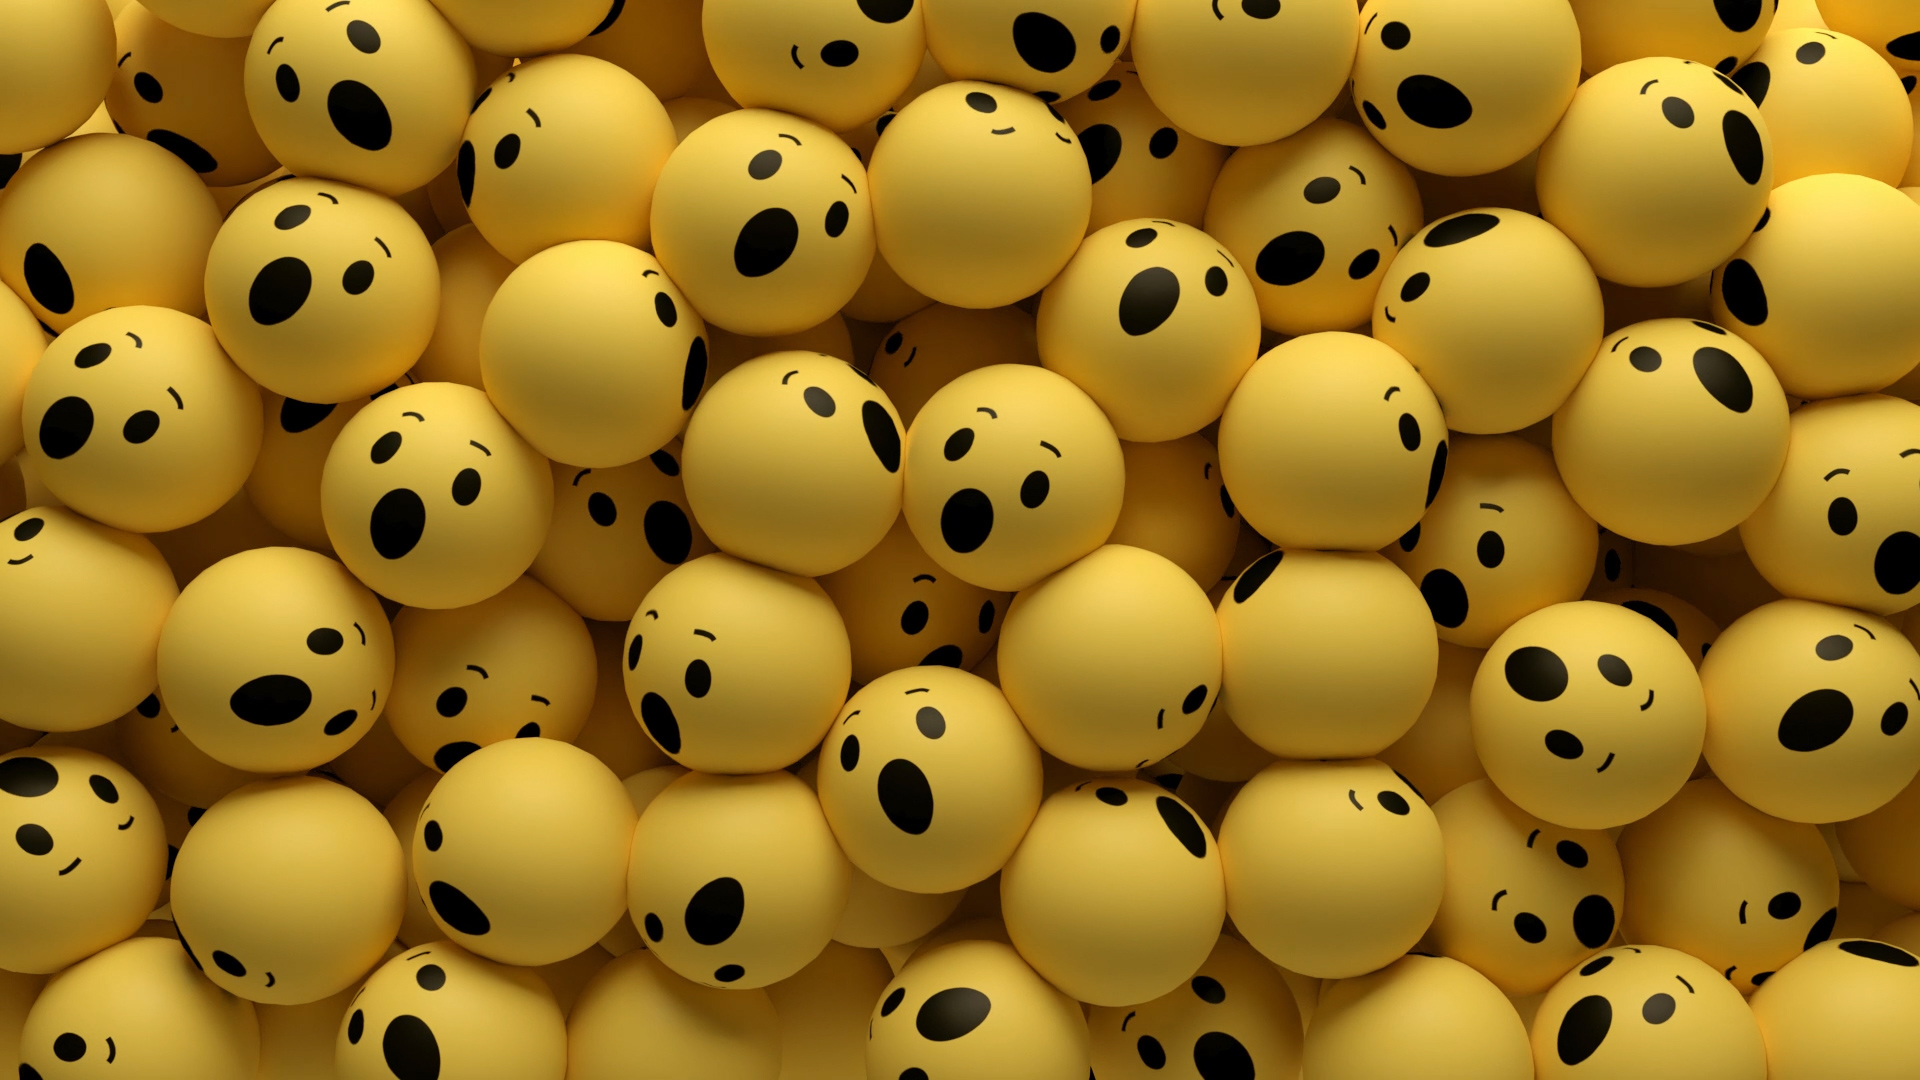 Wow Emoji 3D wallpaper, Download free amazing High Resolution backgrounds images